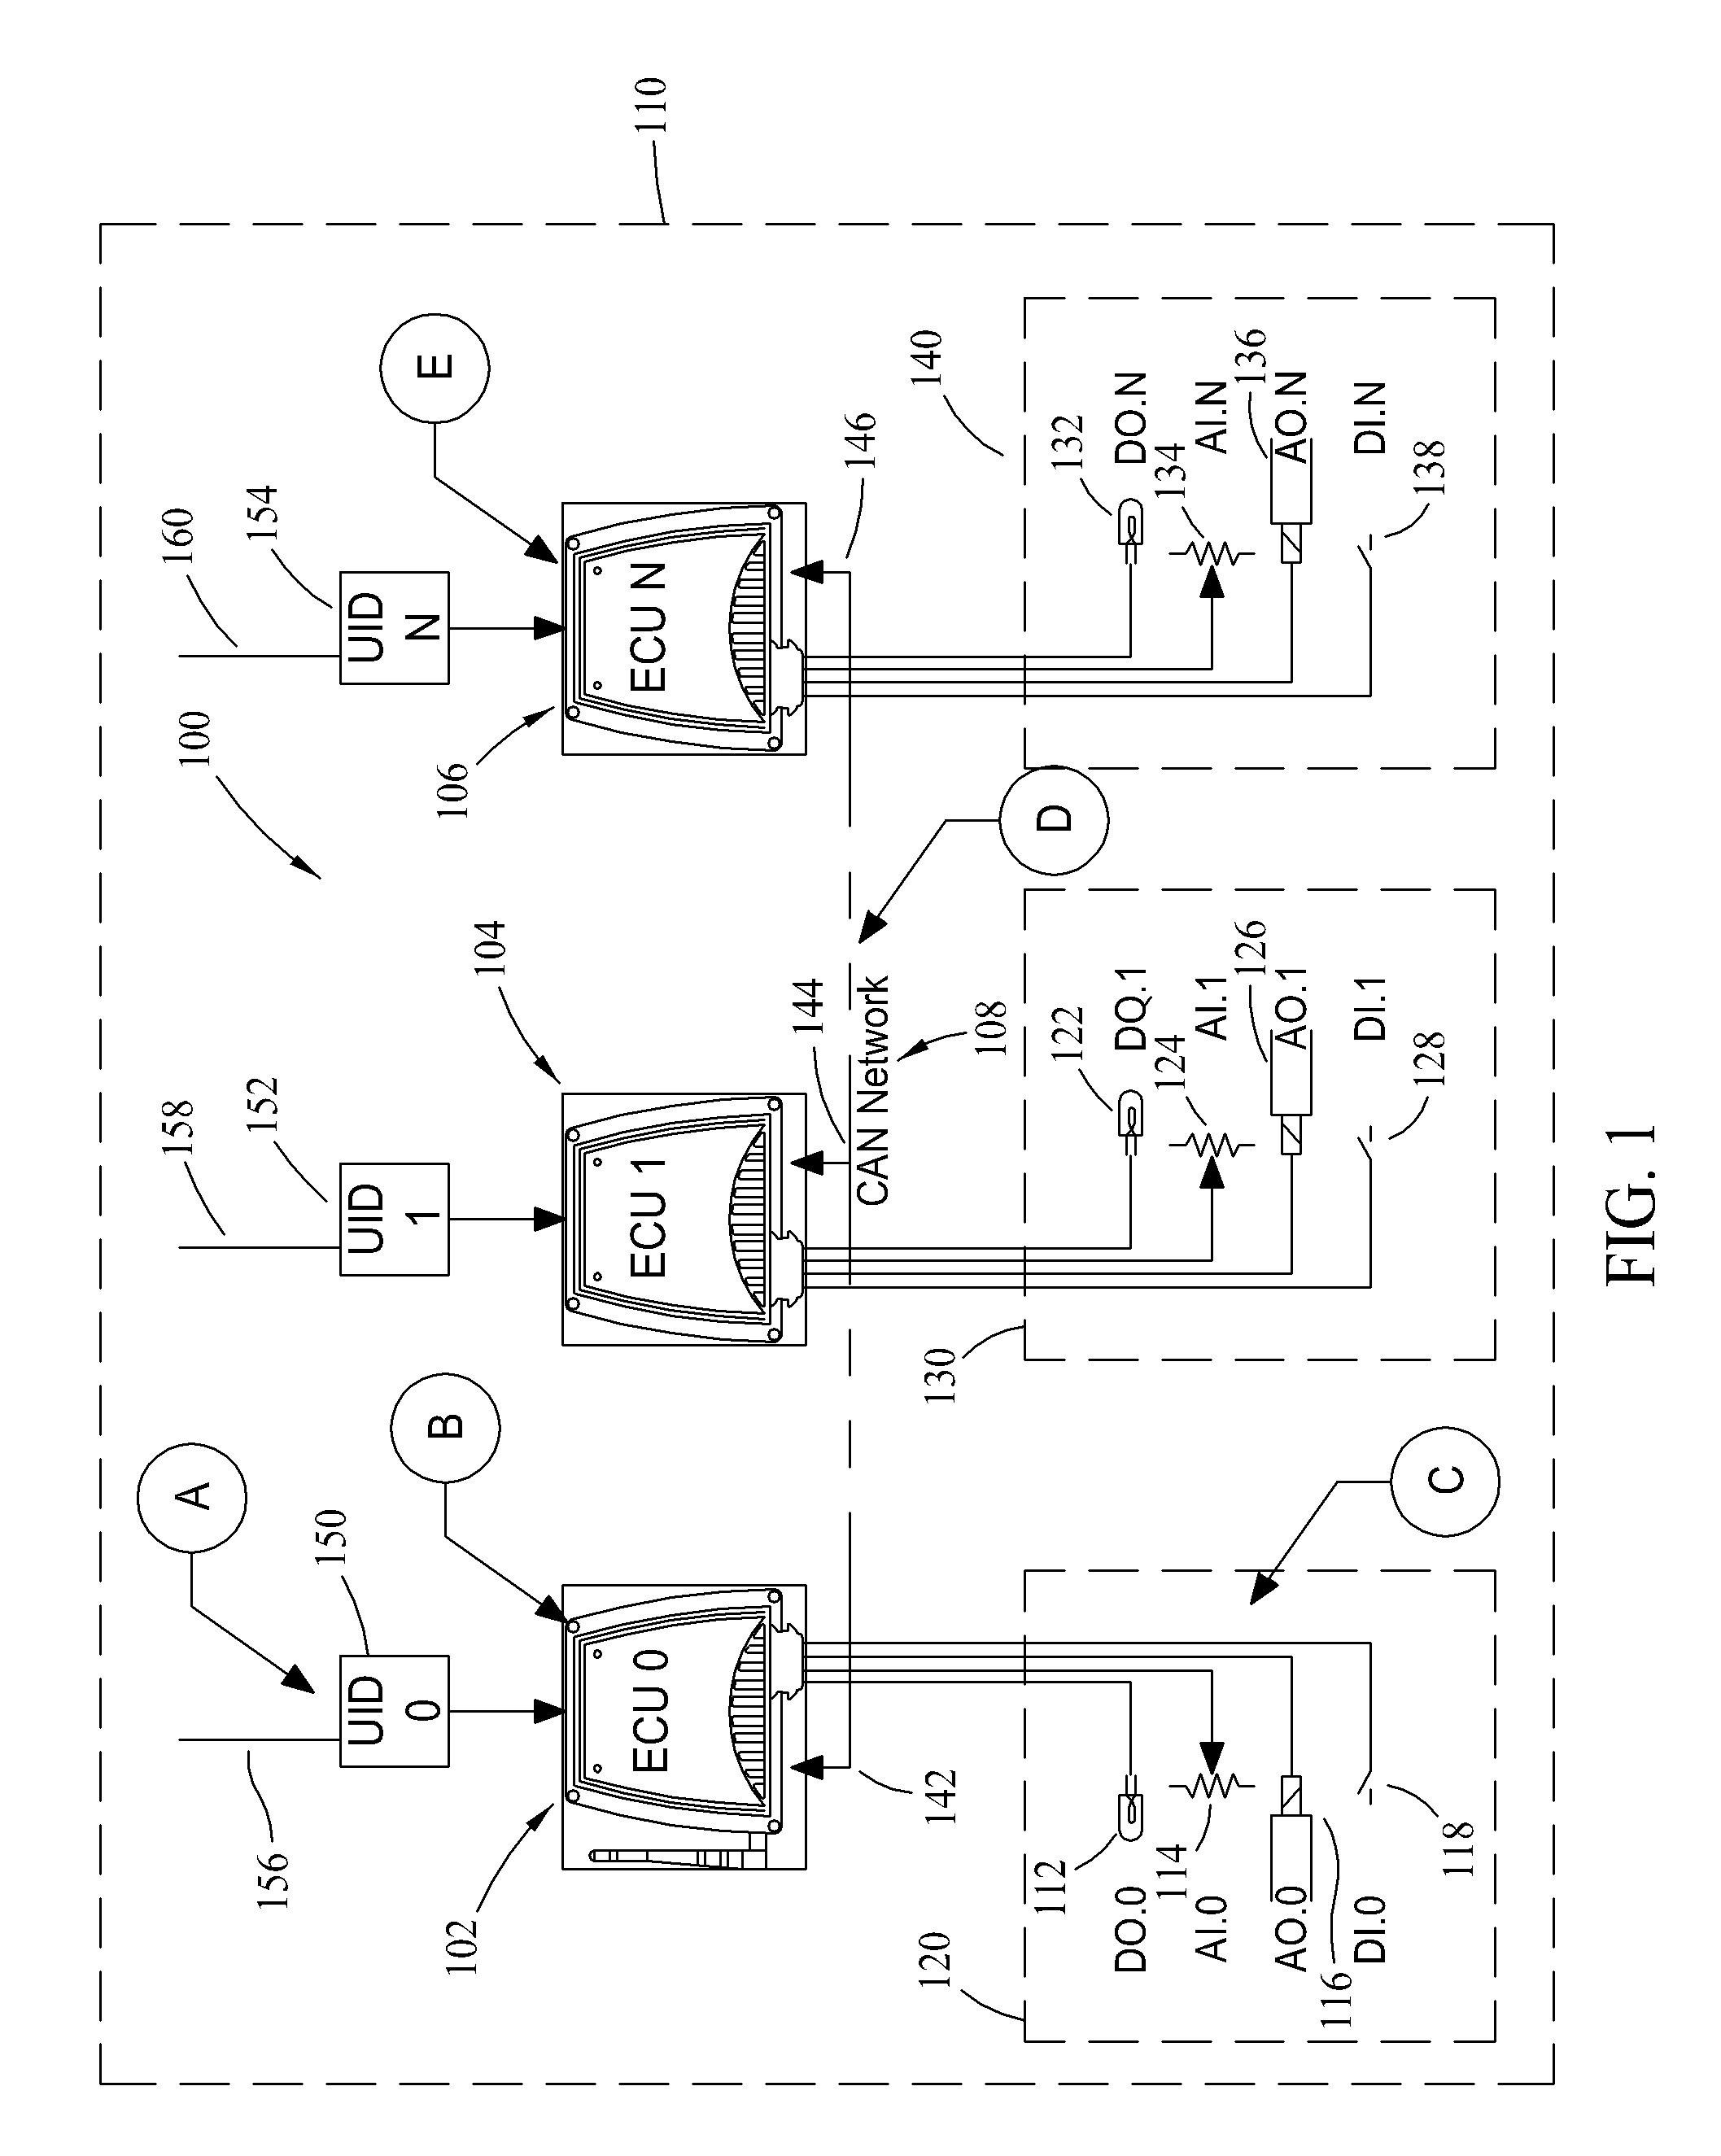 Methods and systems for identifying and configuring networked devices